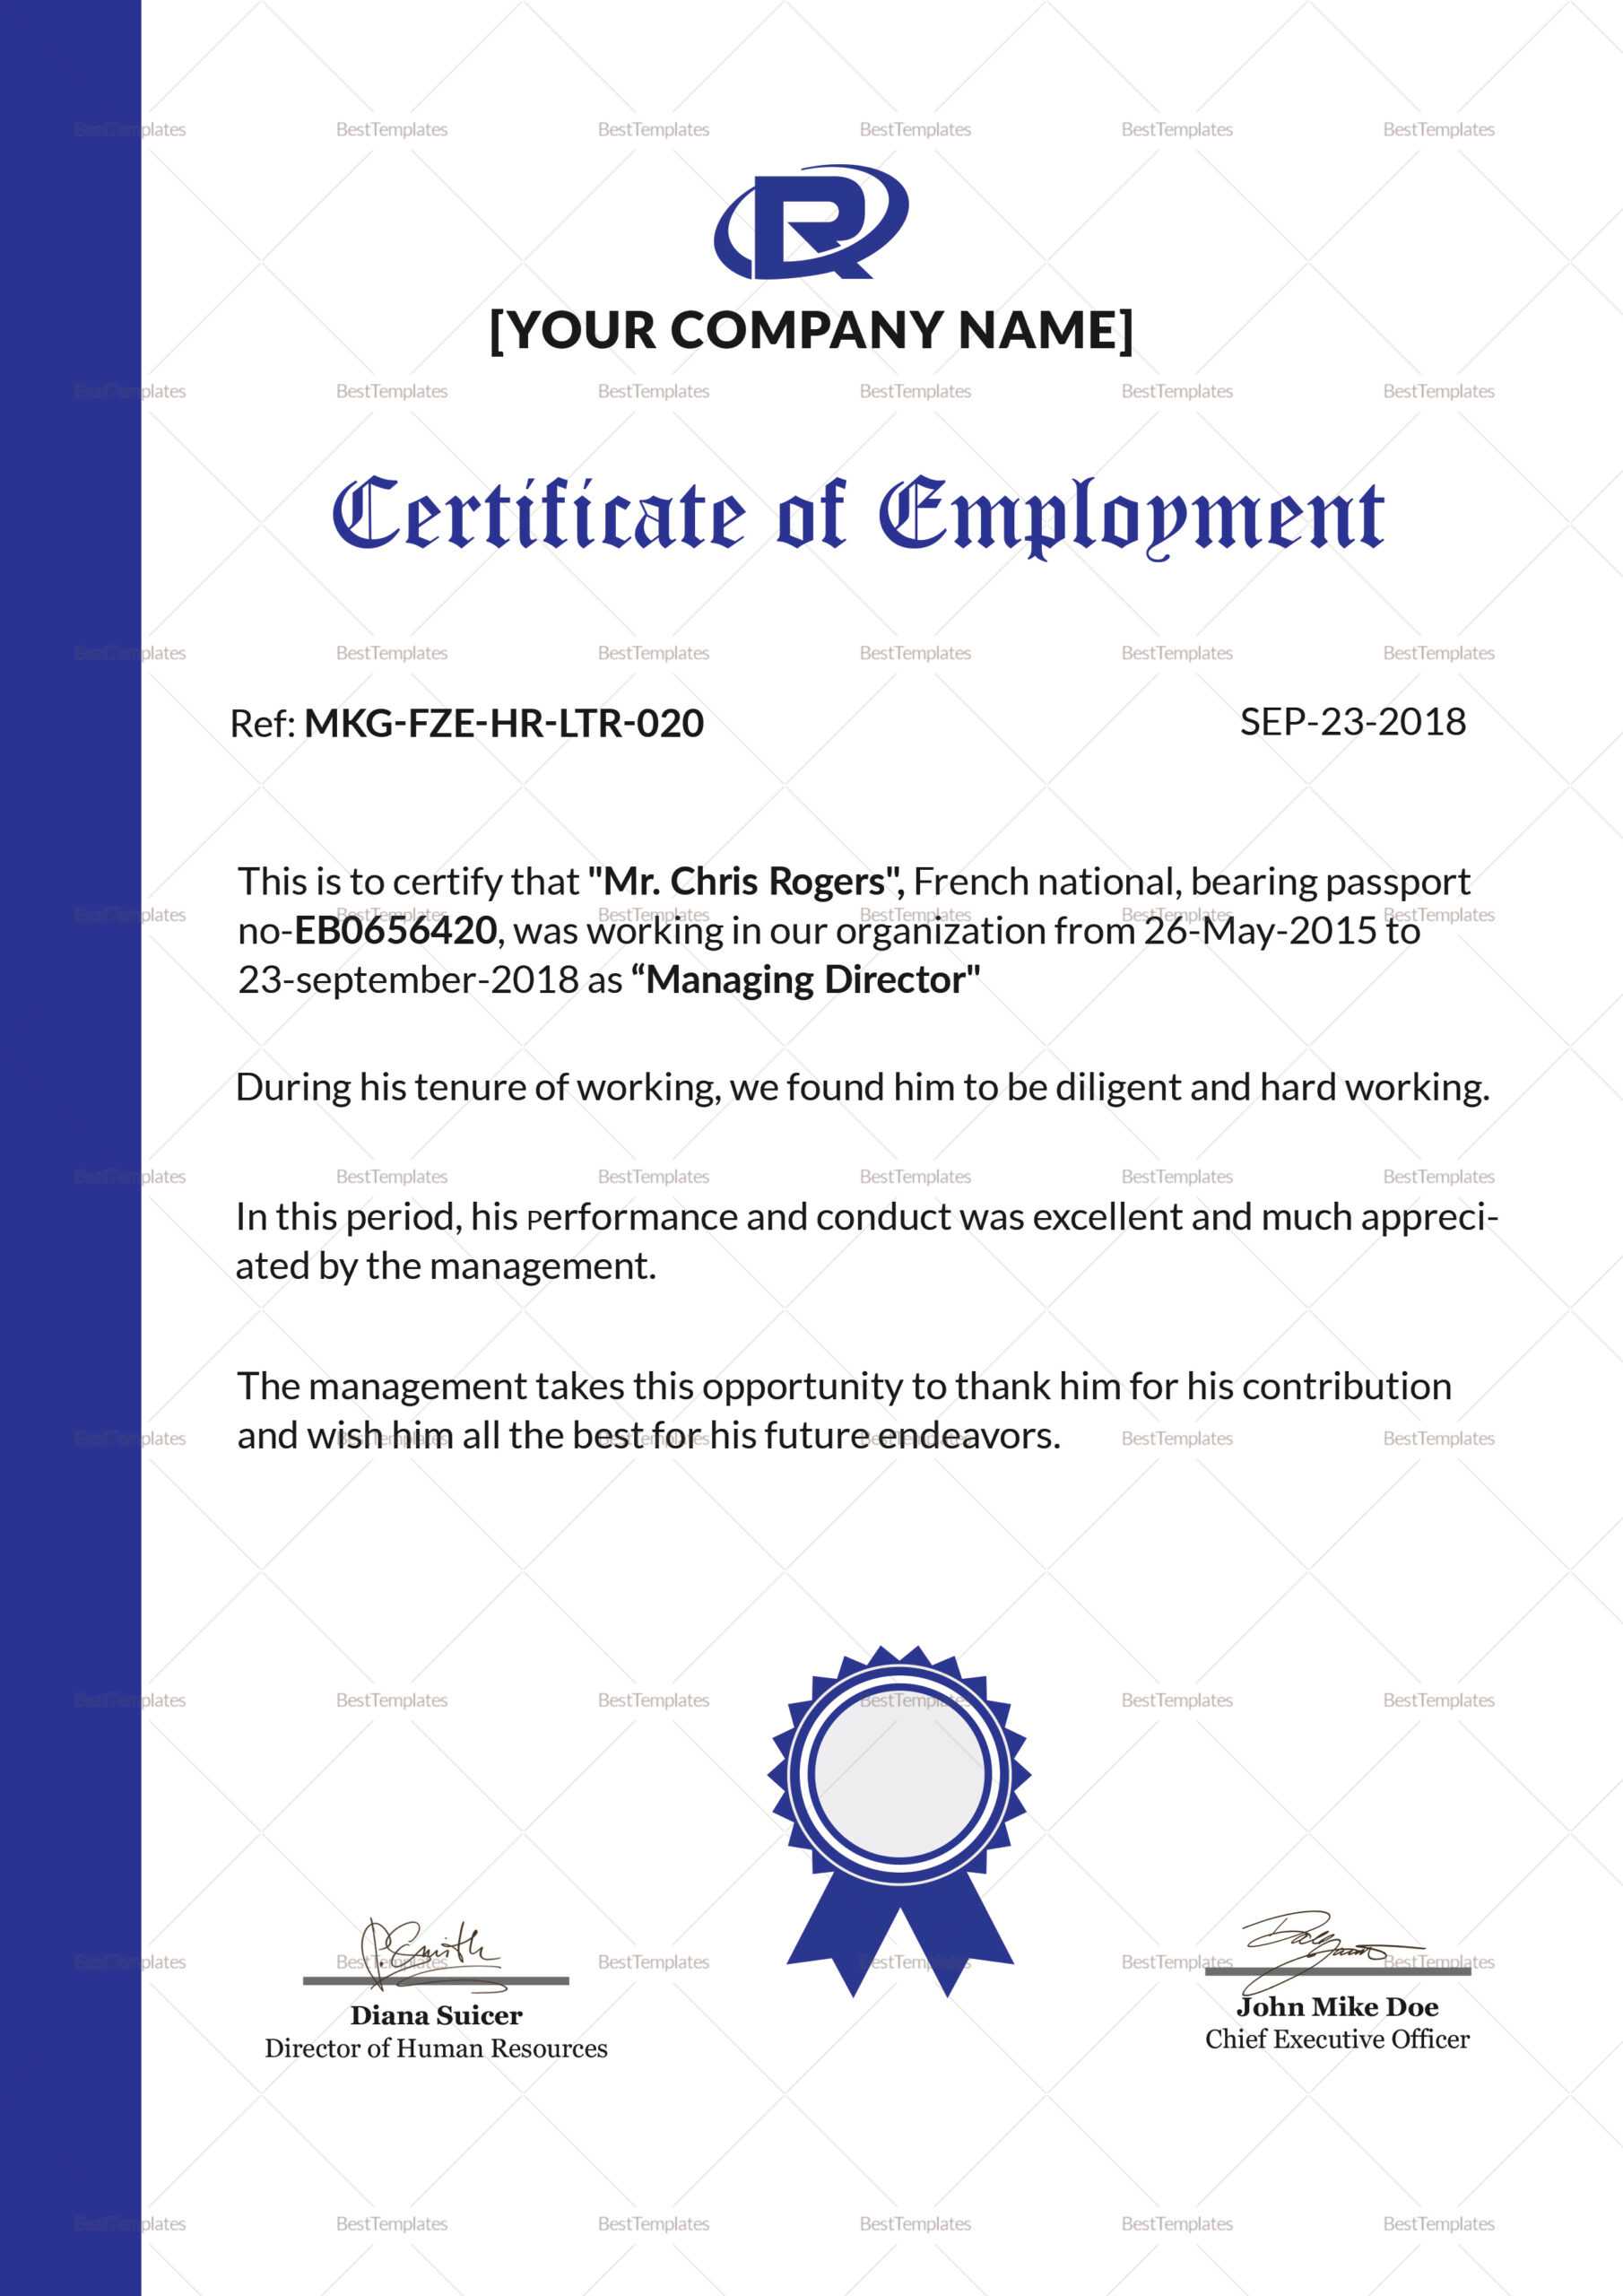 Ba06A2 Certificate Of Employment Sample Docx | Wiring Resources Regarding Template Of Certificate Of Employment